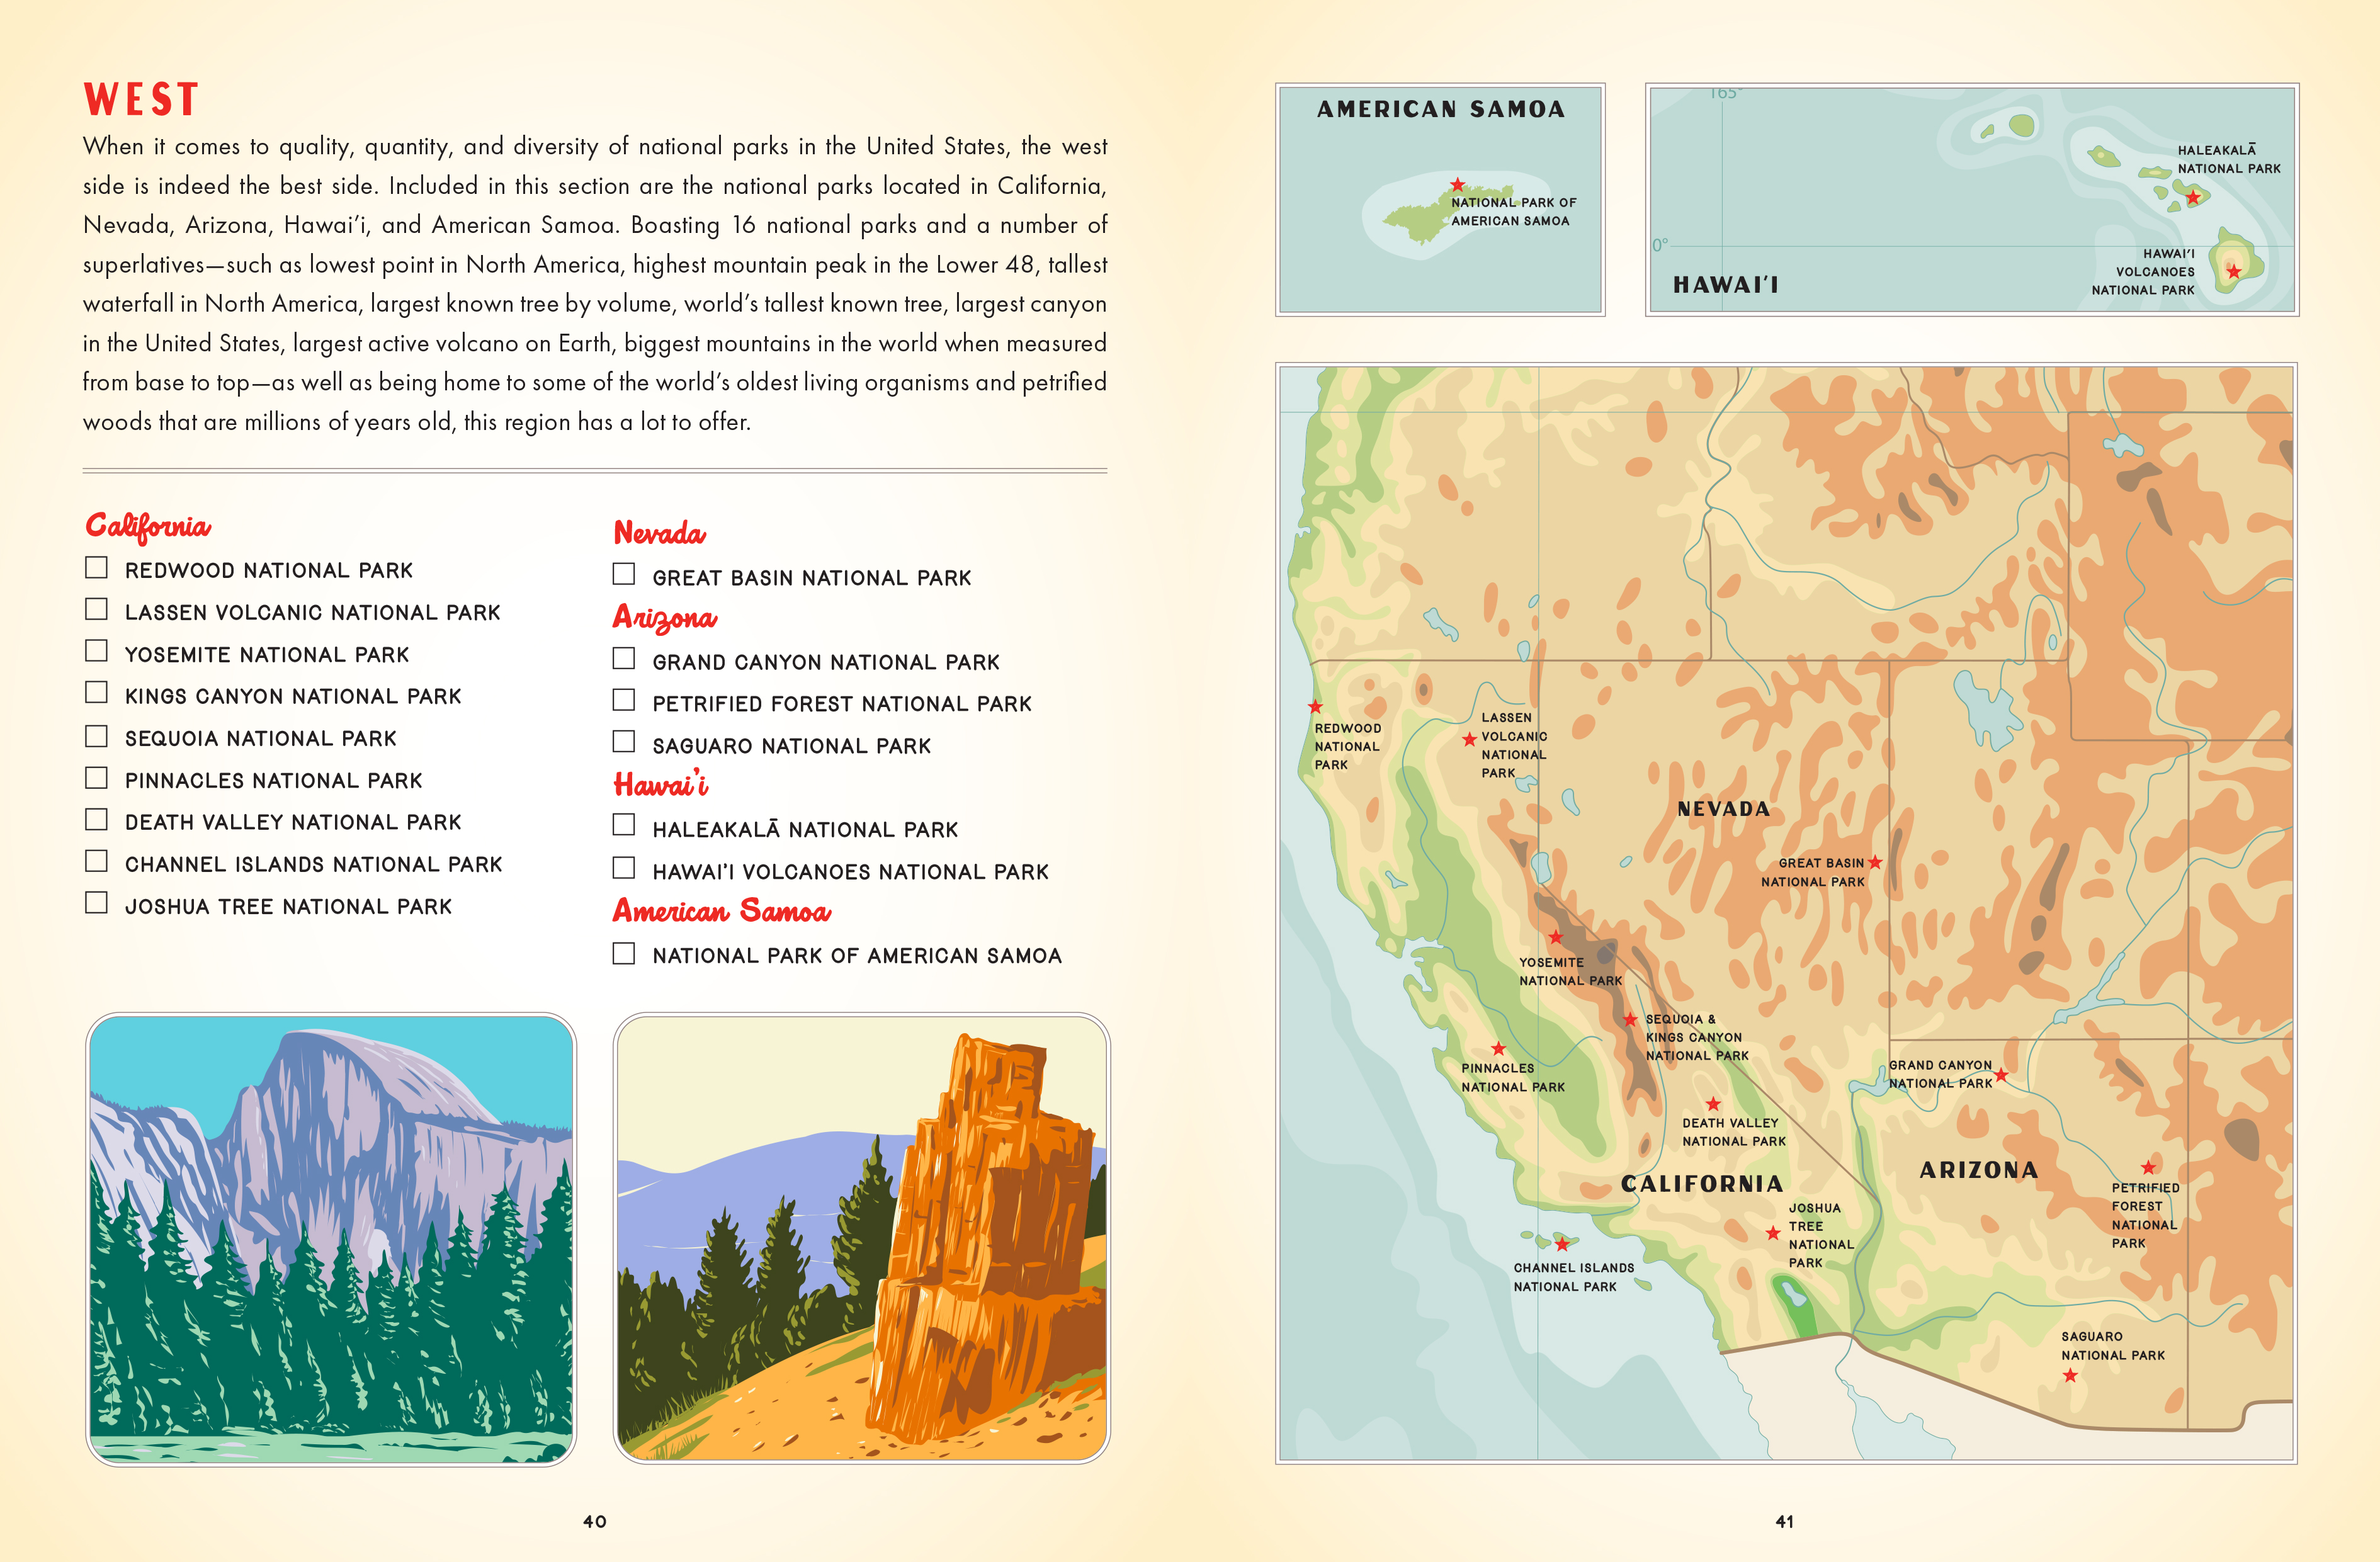 The National Parks Bucket List